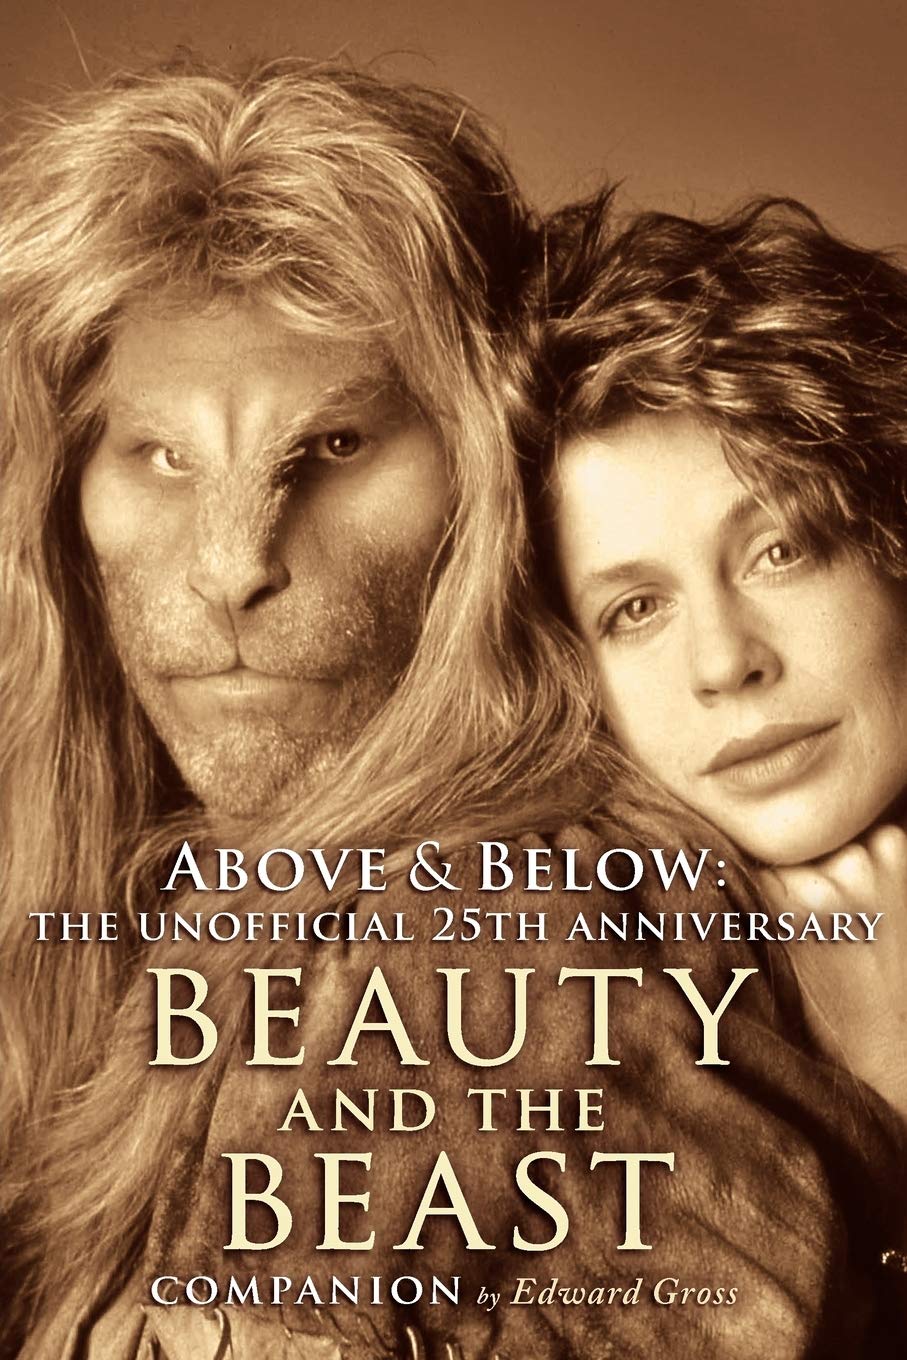 Ron Perlman - Vincent On The Television Series “Beauty And The Beast” - Hollywood Actors Family